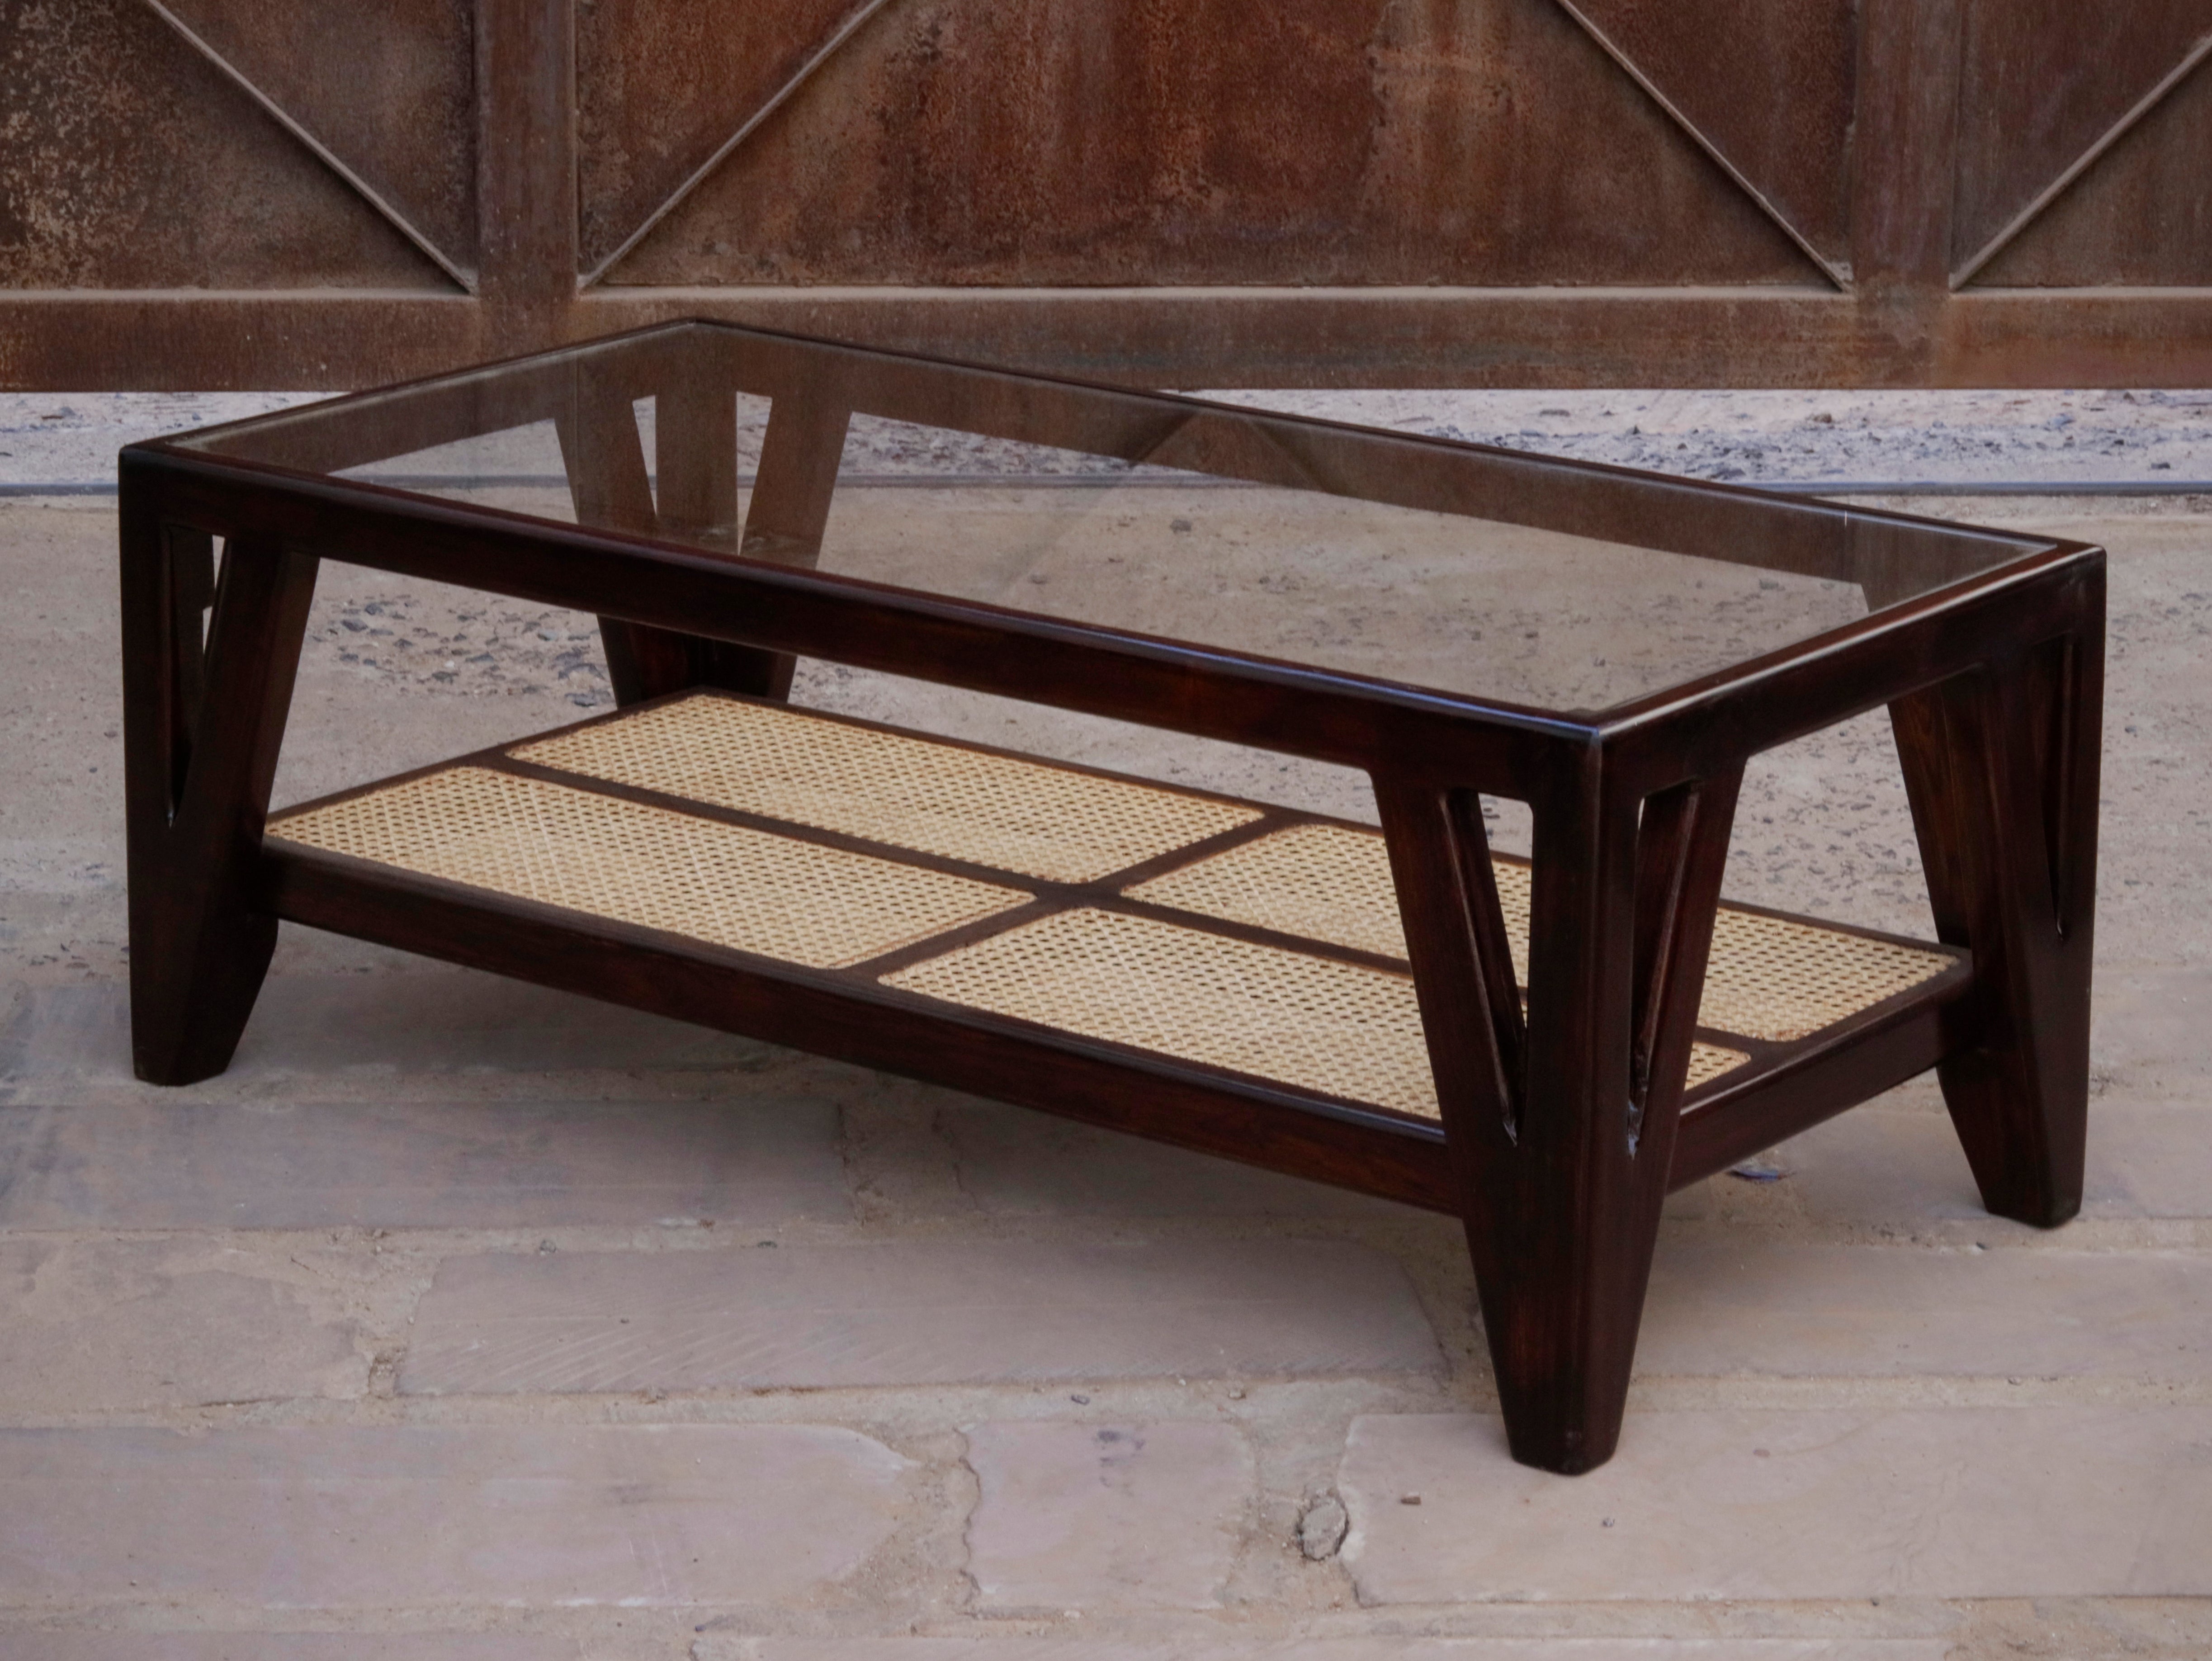 Ethnic Premium Cane Style Handmade Wooden Coffee Table Coffee Table